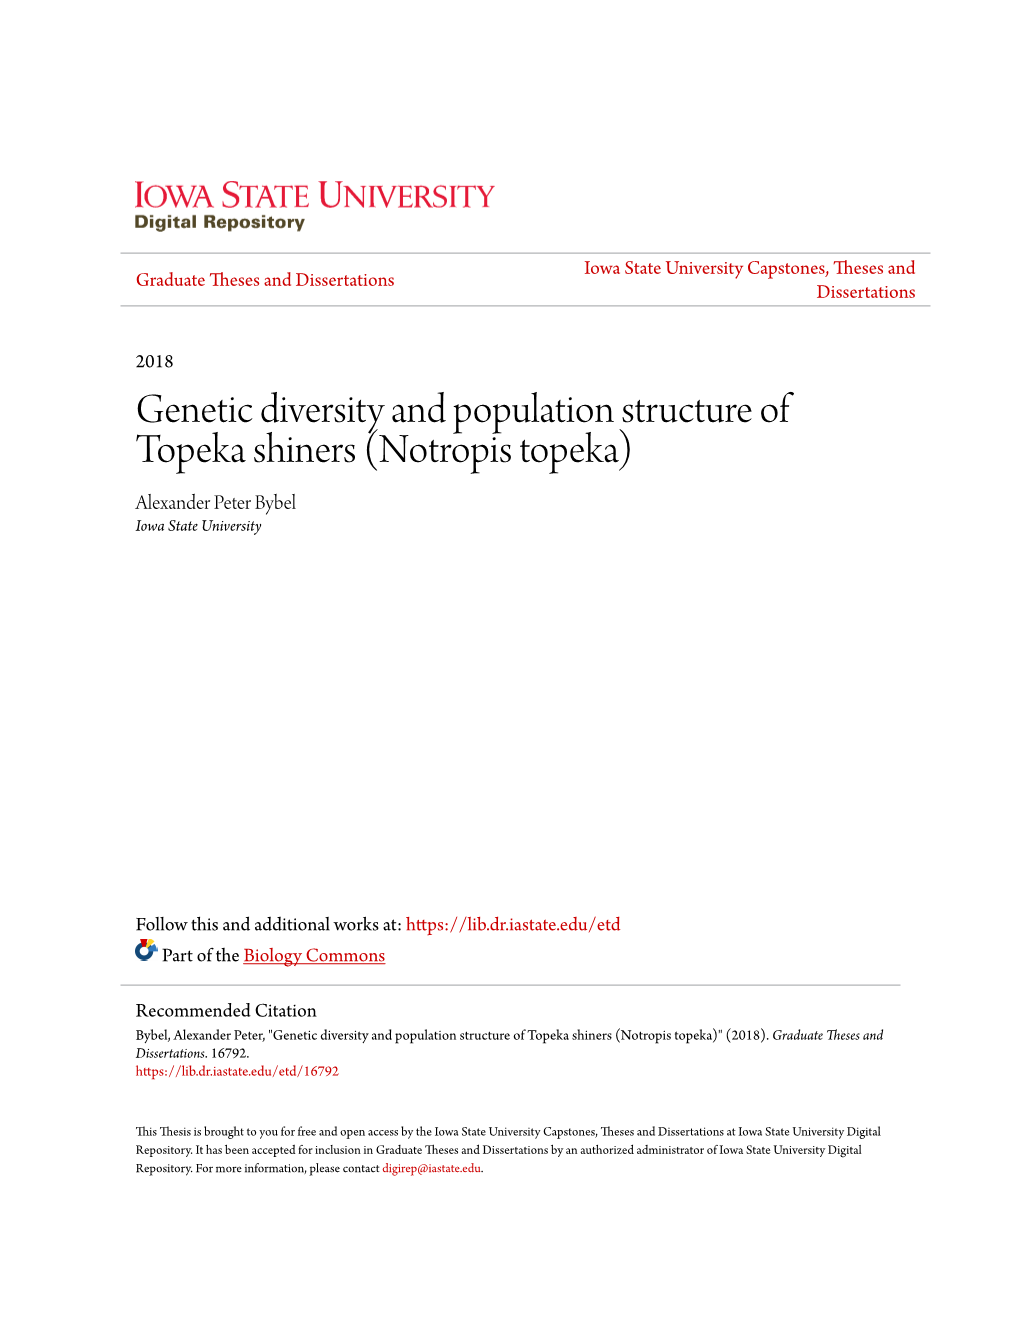 Genetic Diversity and Population Structure of Topeka Shiners (Notropis Topeka) Alexander Peter Bybel Iowa State University